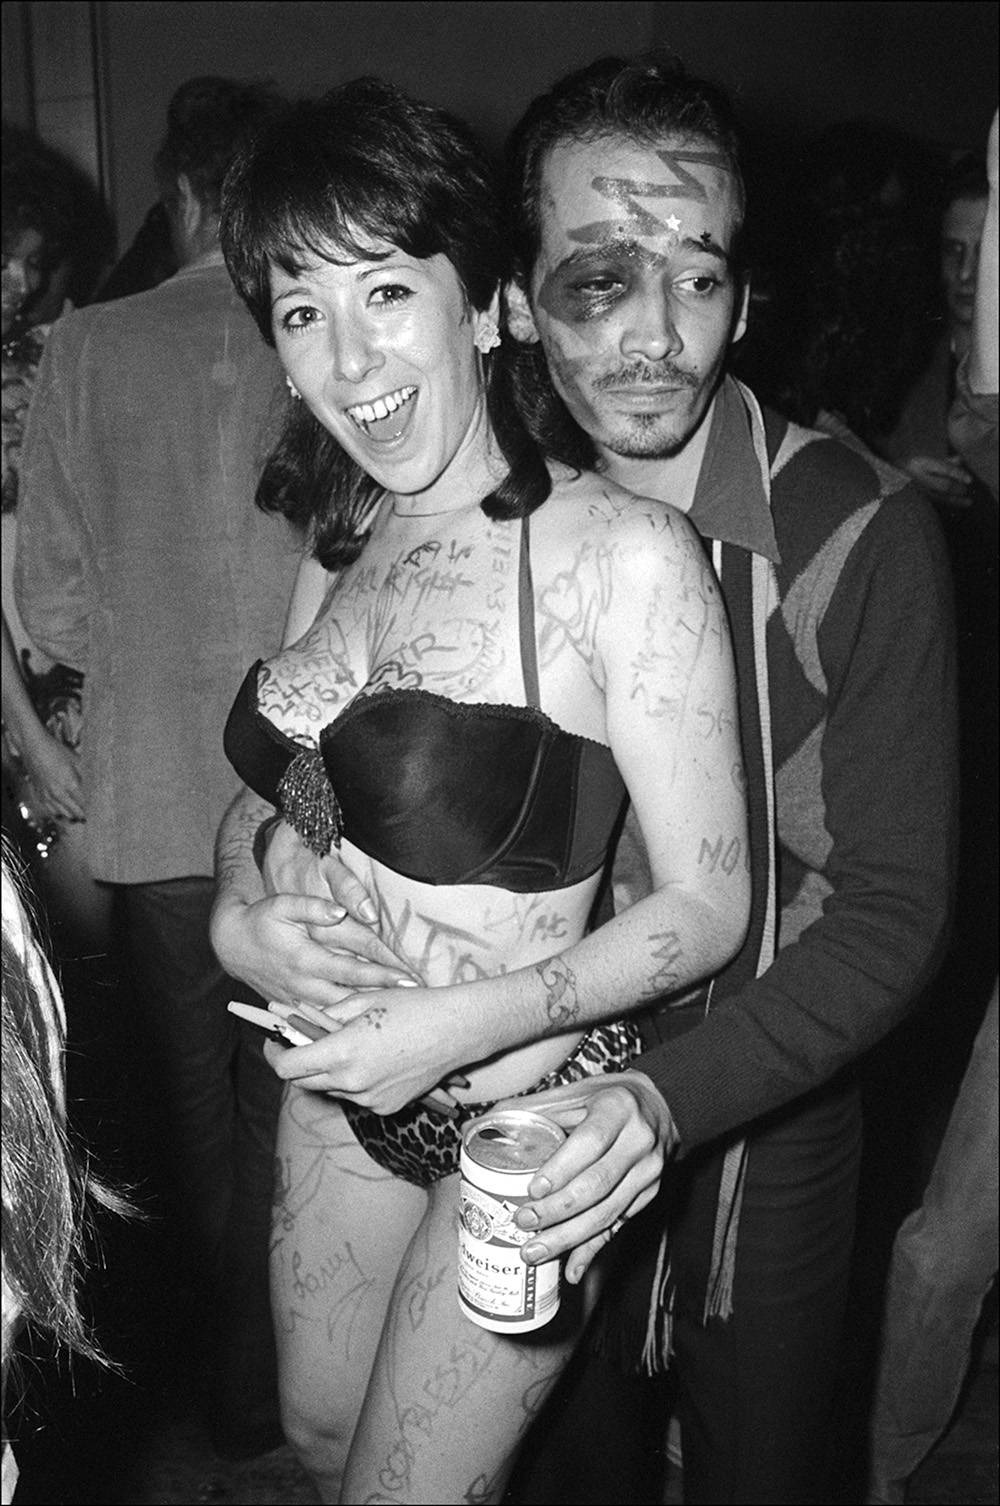 Annie Sprinkle, Fot. Getty Images